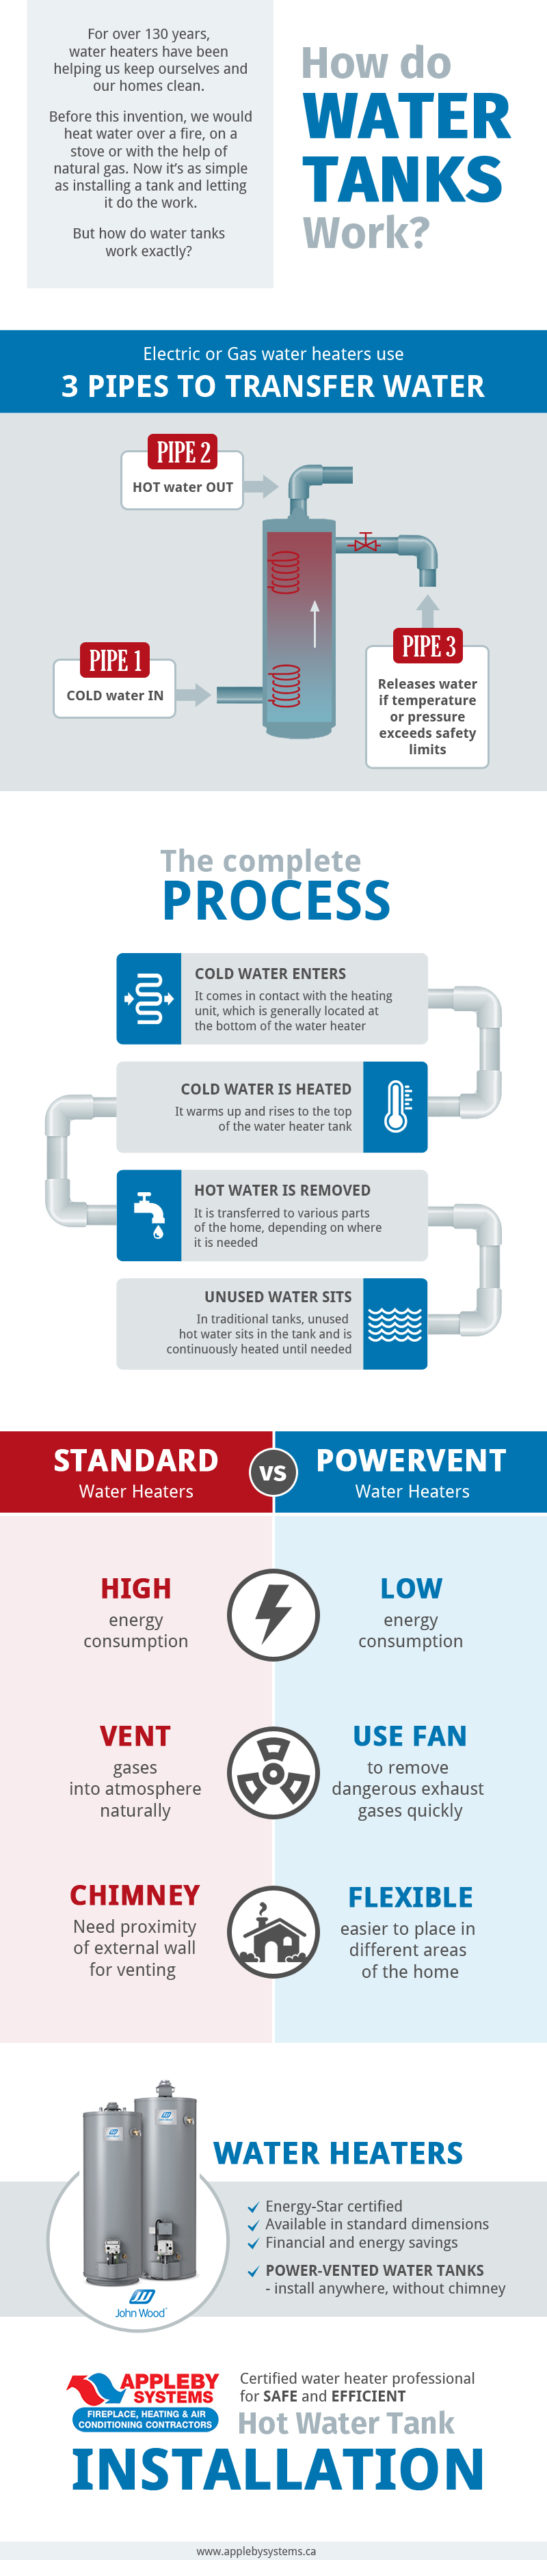 How Do Hot Water Tanks Work